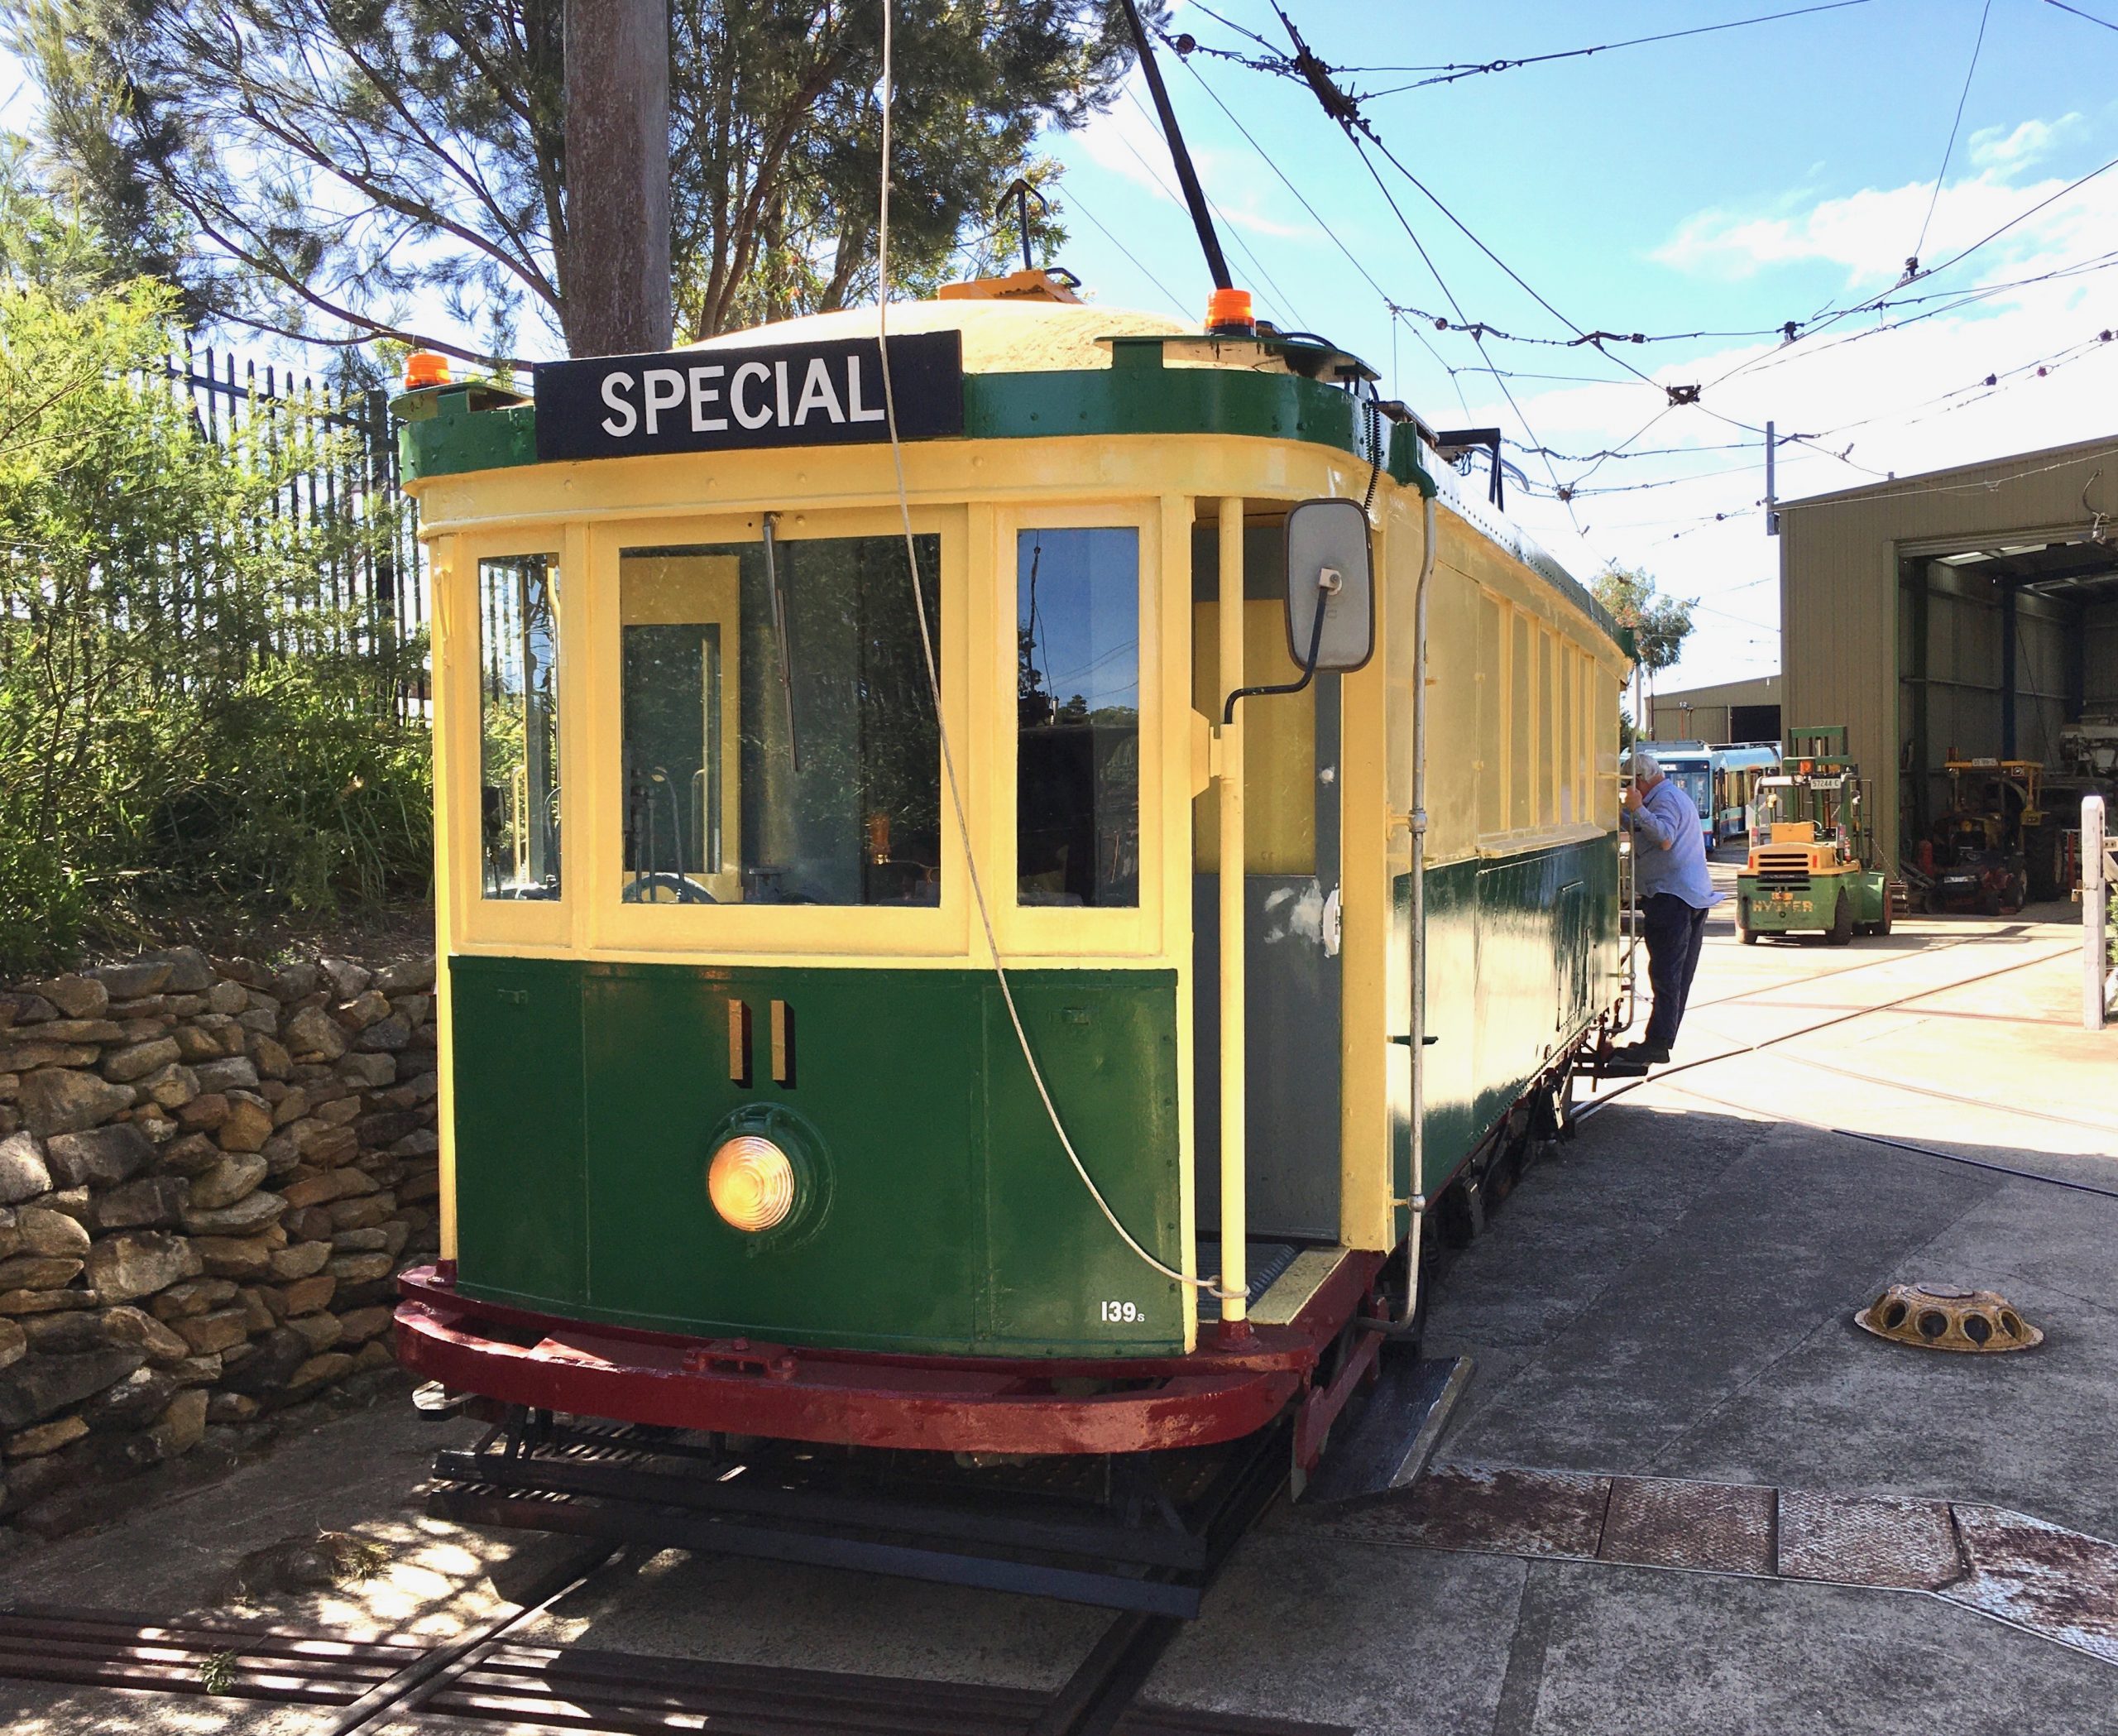 The Trams of the Sydney Tramway Museum - Ride a tram in ...